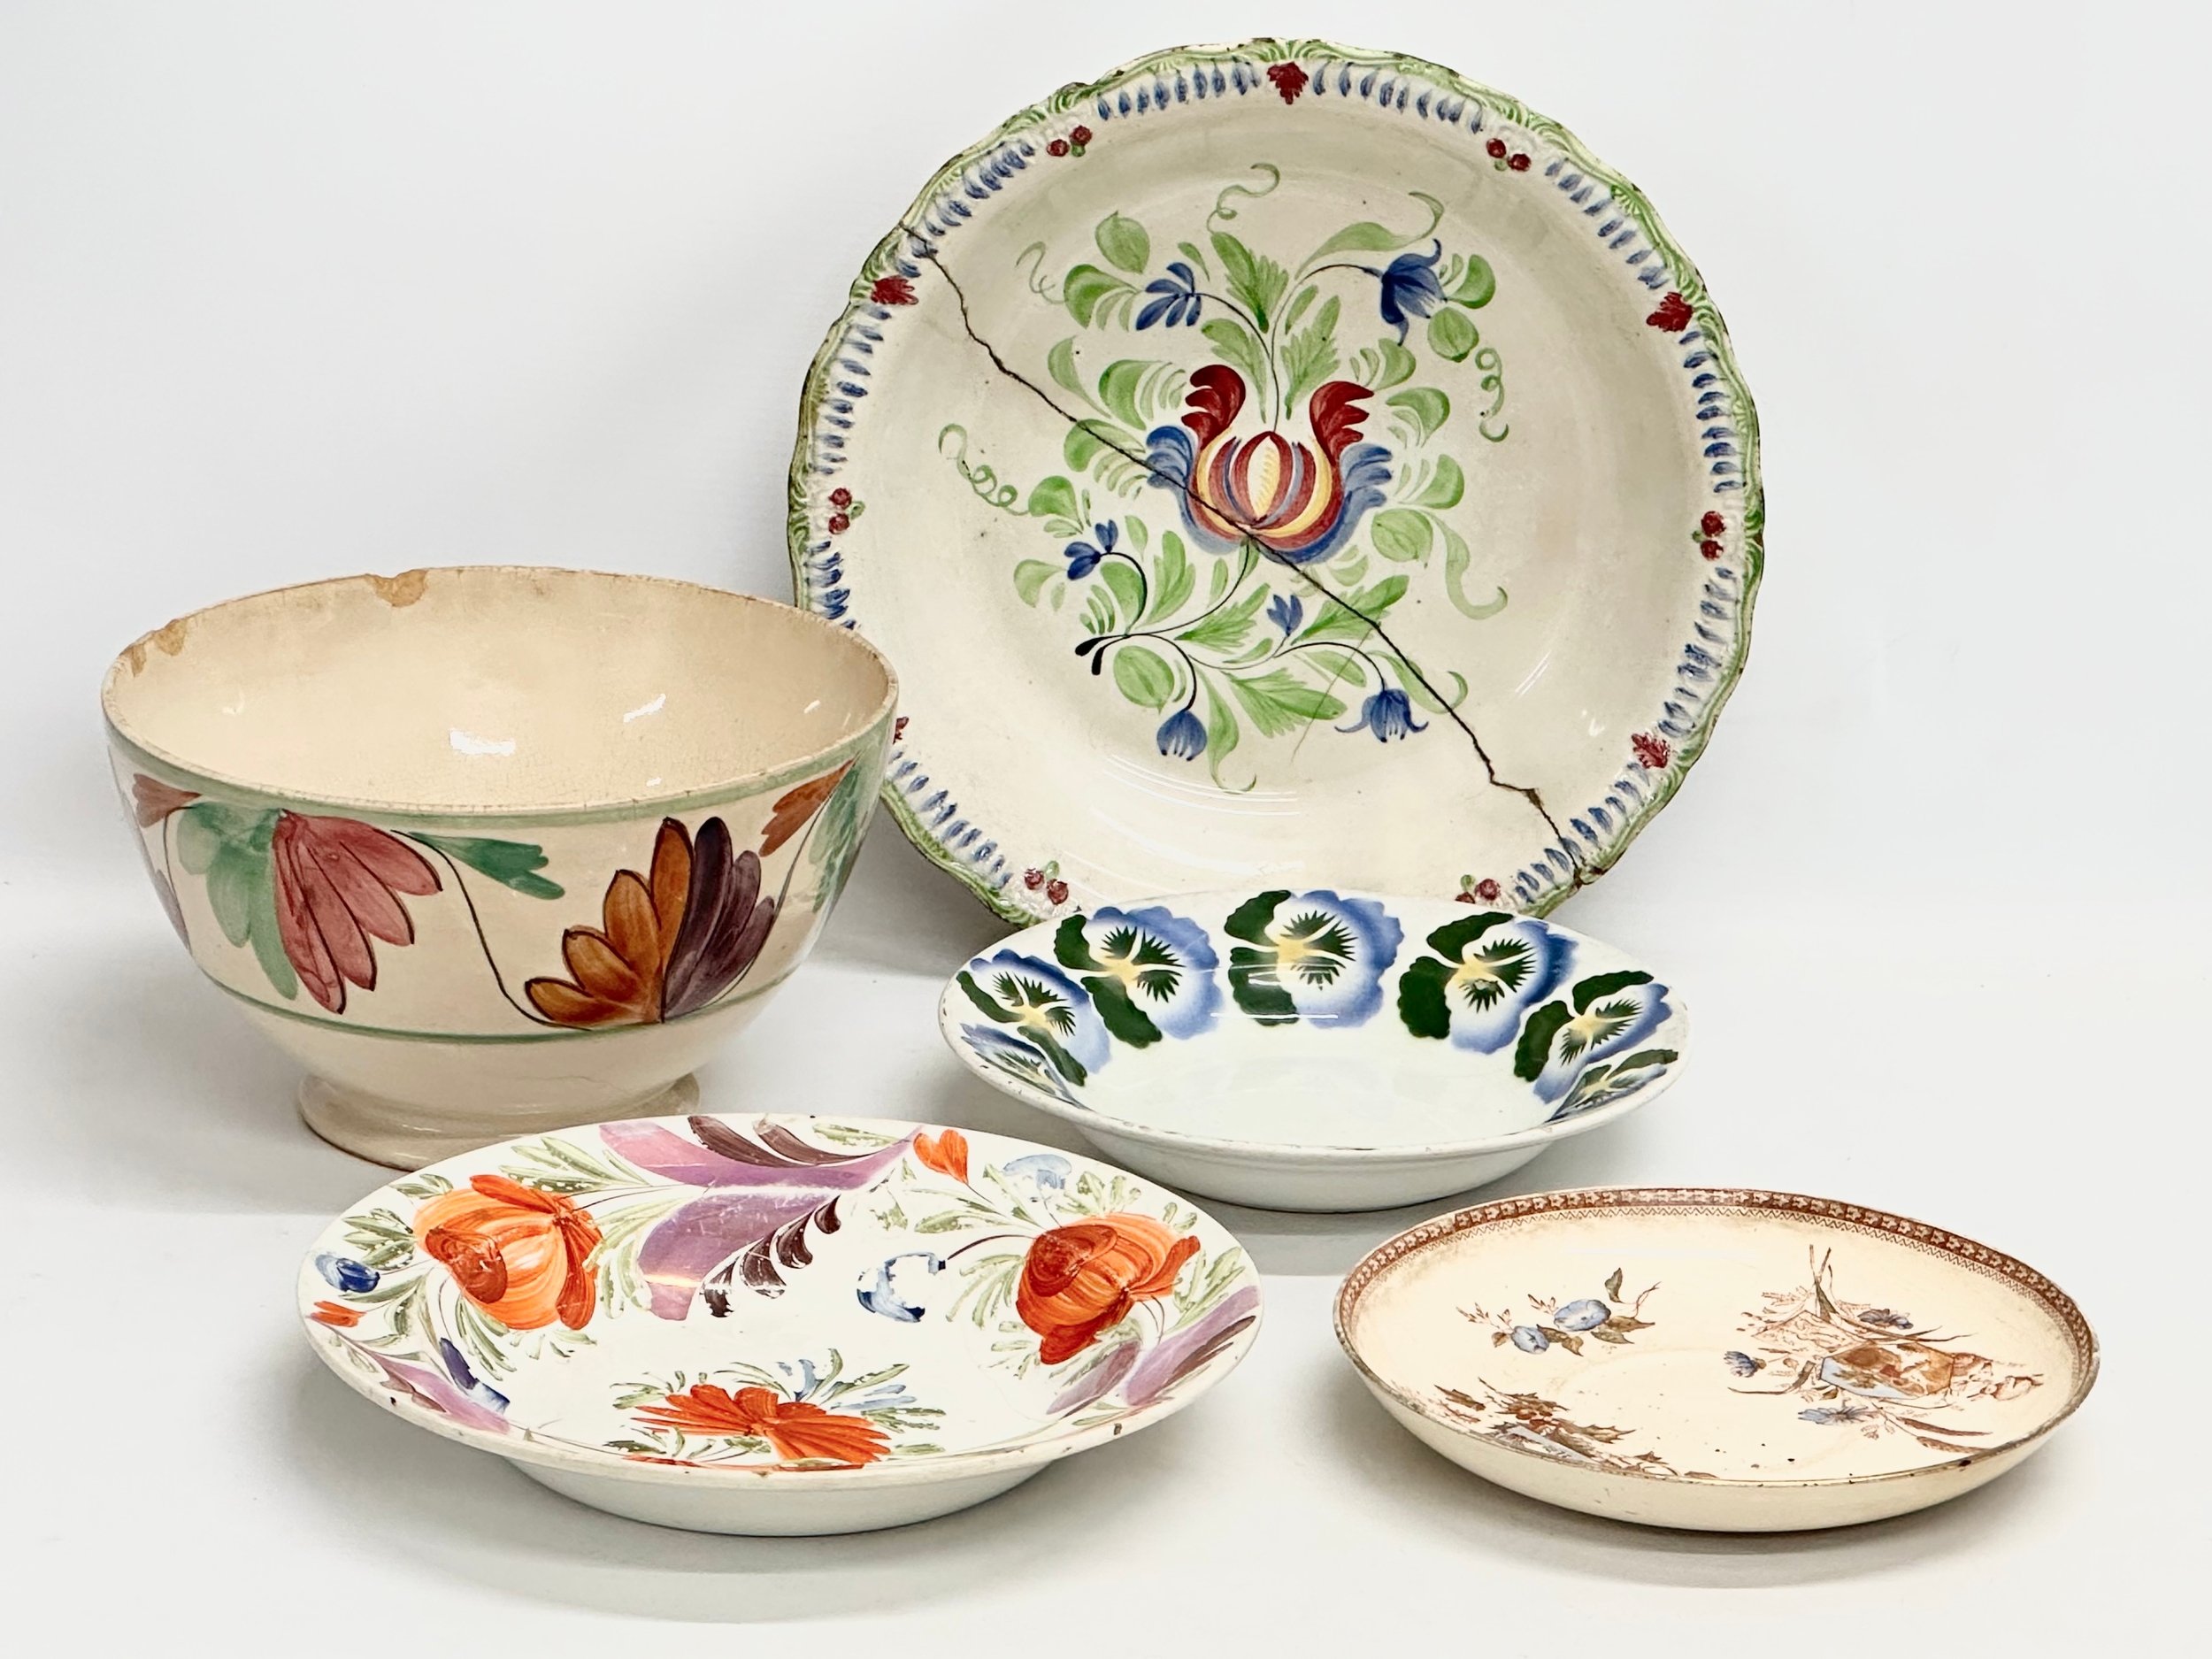 A collection of early/mid 19th century earthenware pottery. Large Italian bowl 30x6.5cm, circa